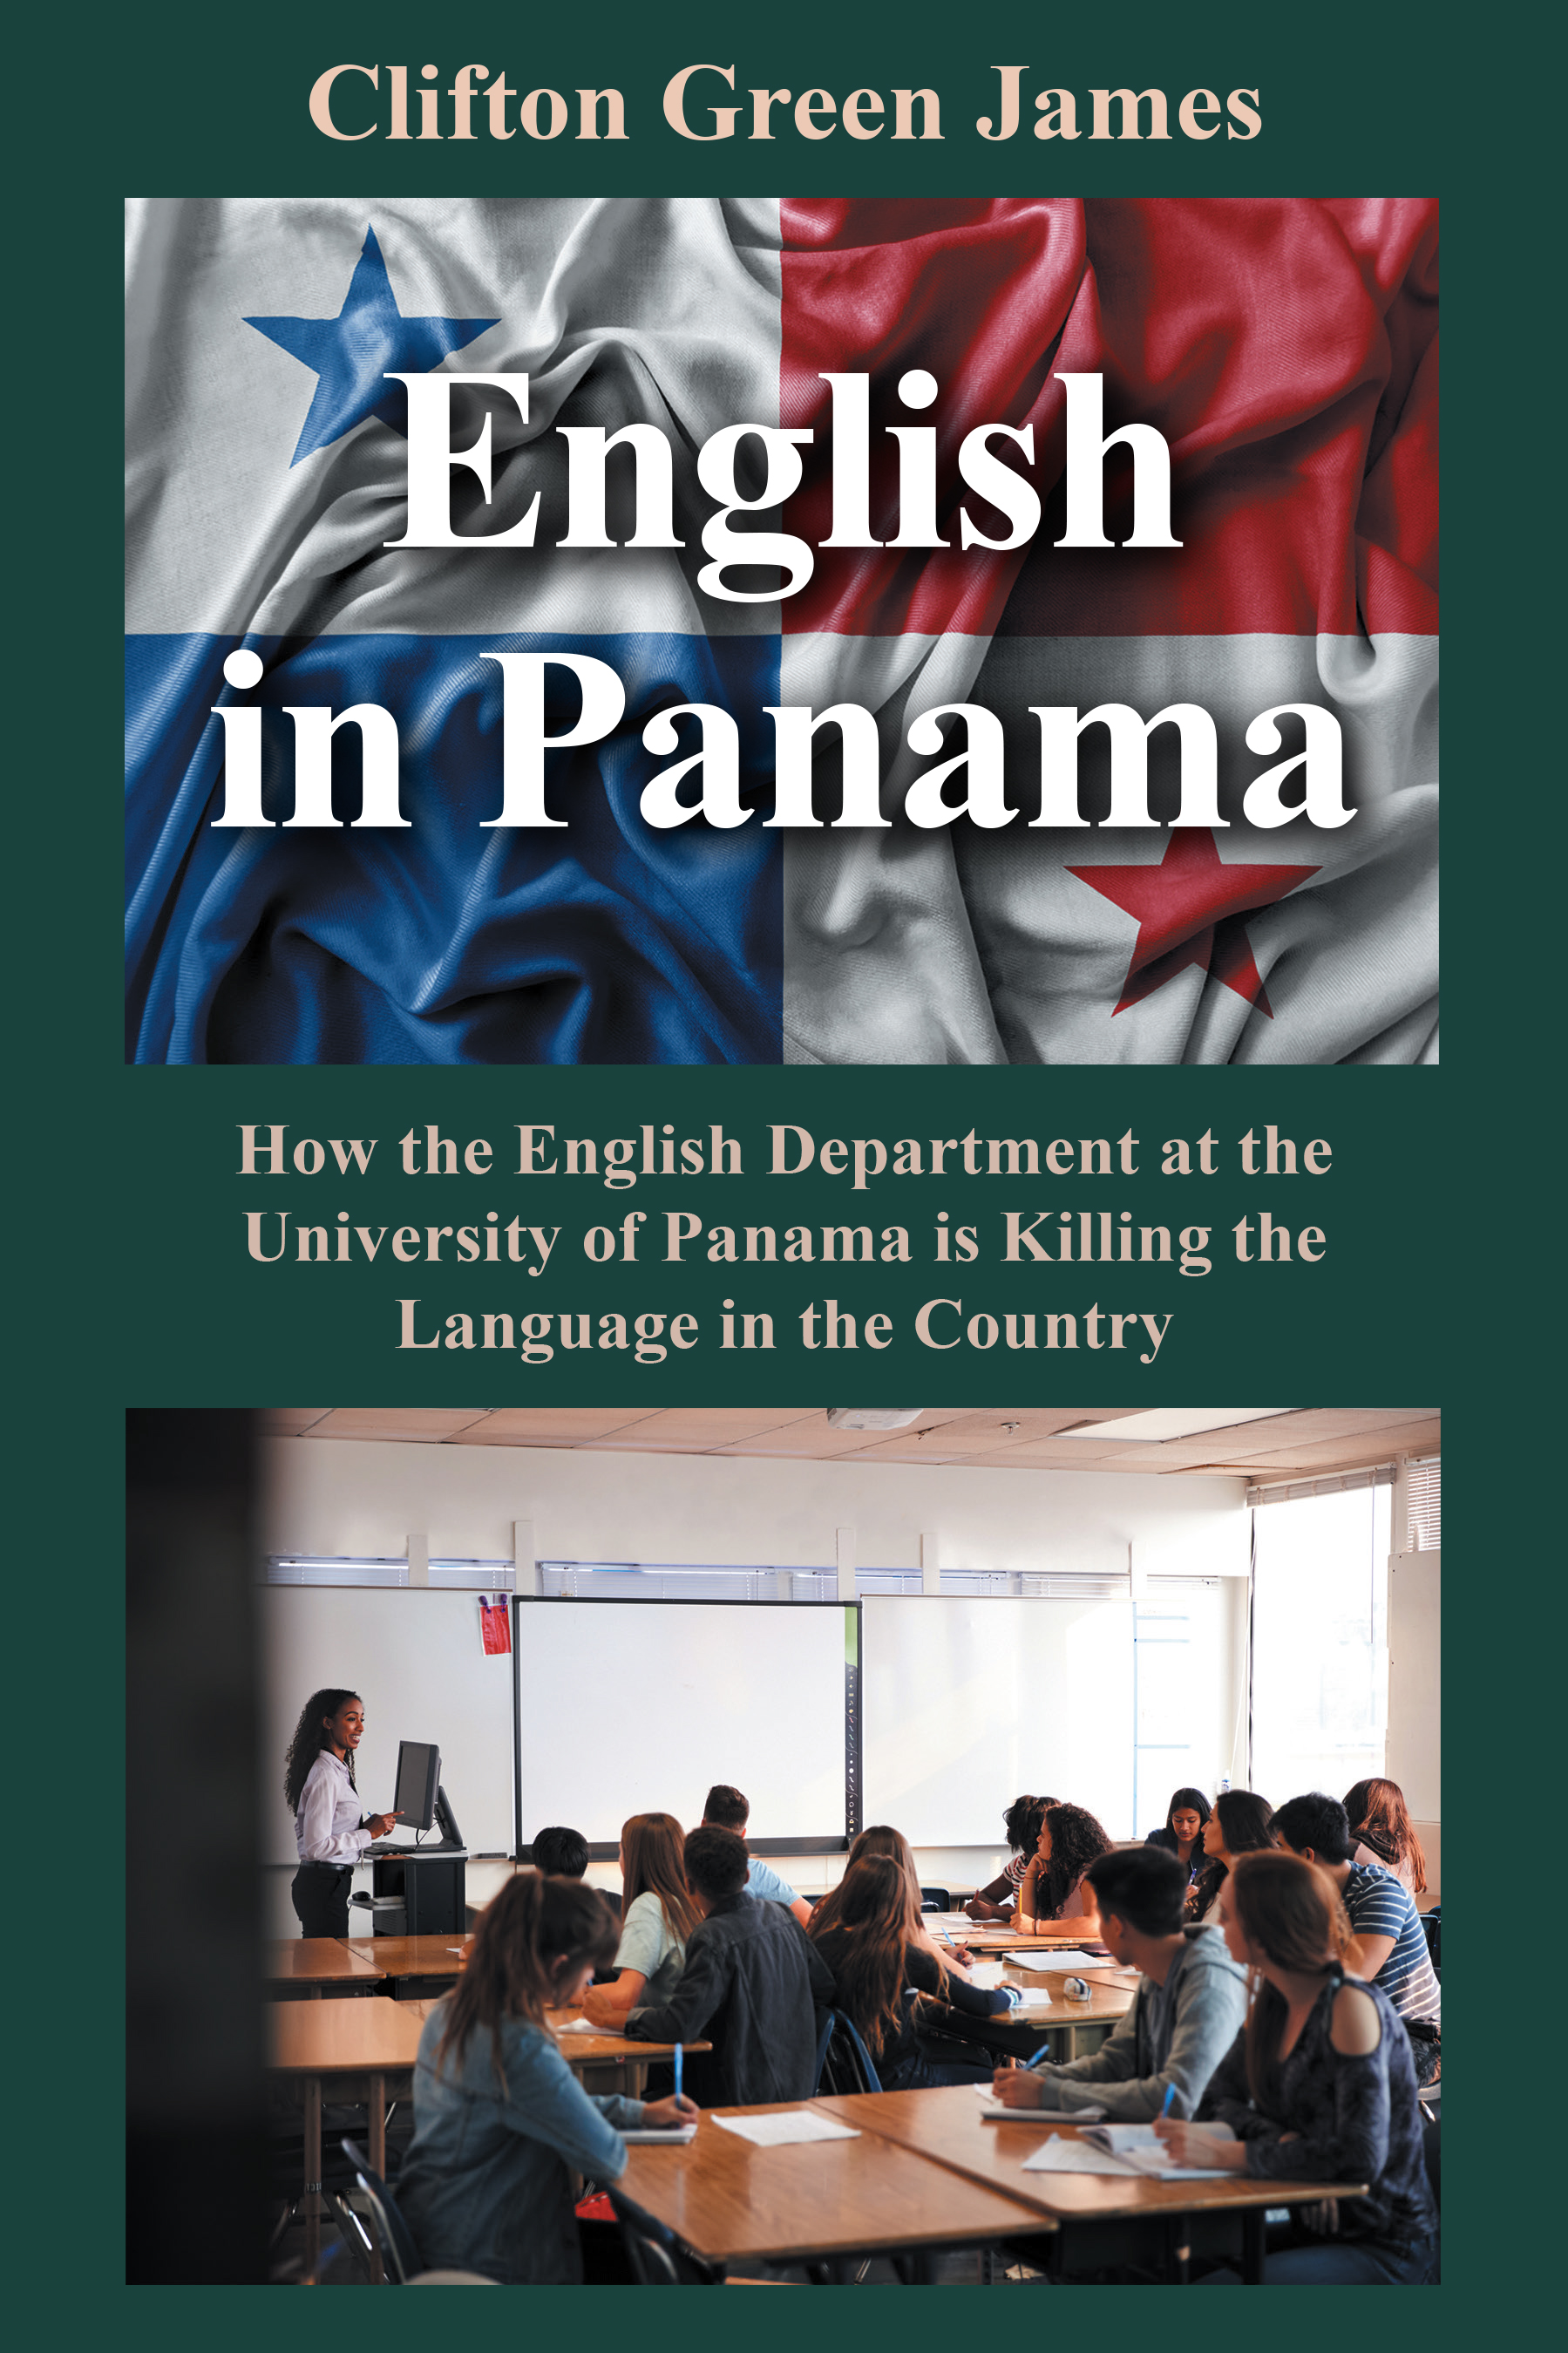 Author Clifton Green James’s New Book, "English in Panama: How the English Department at the University of Panama is Killing the Language in the Country," is Released